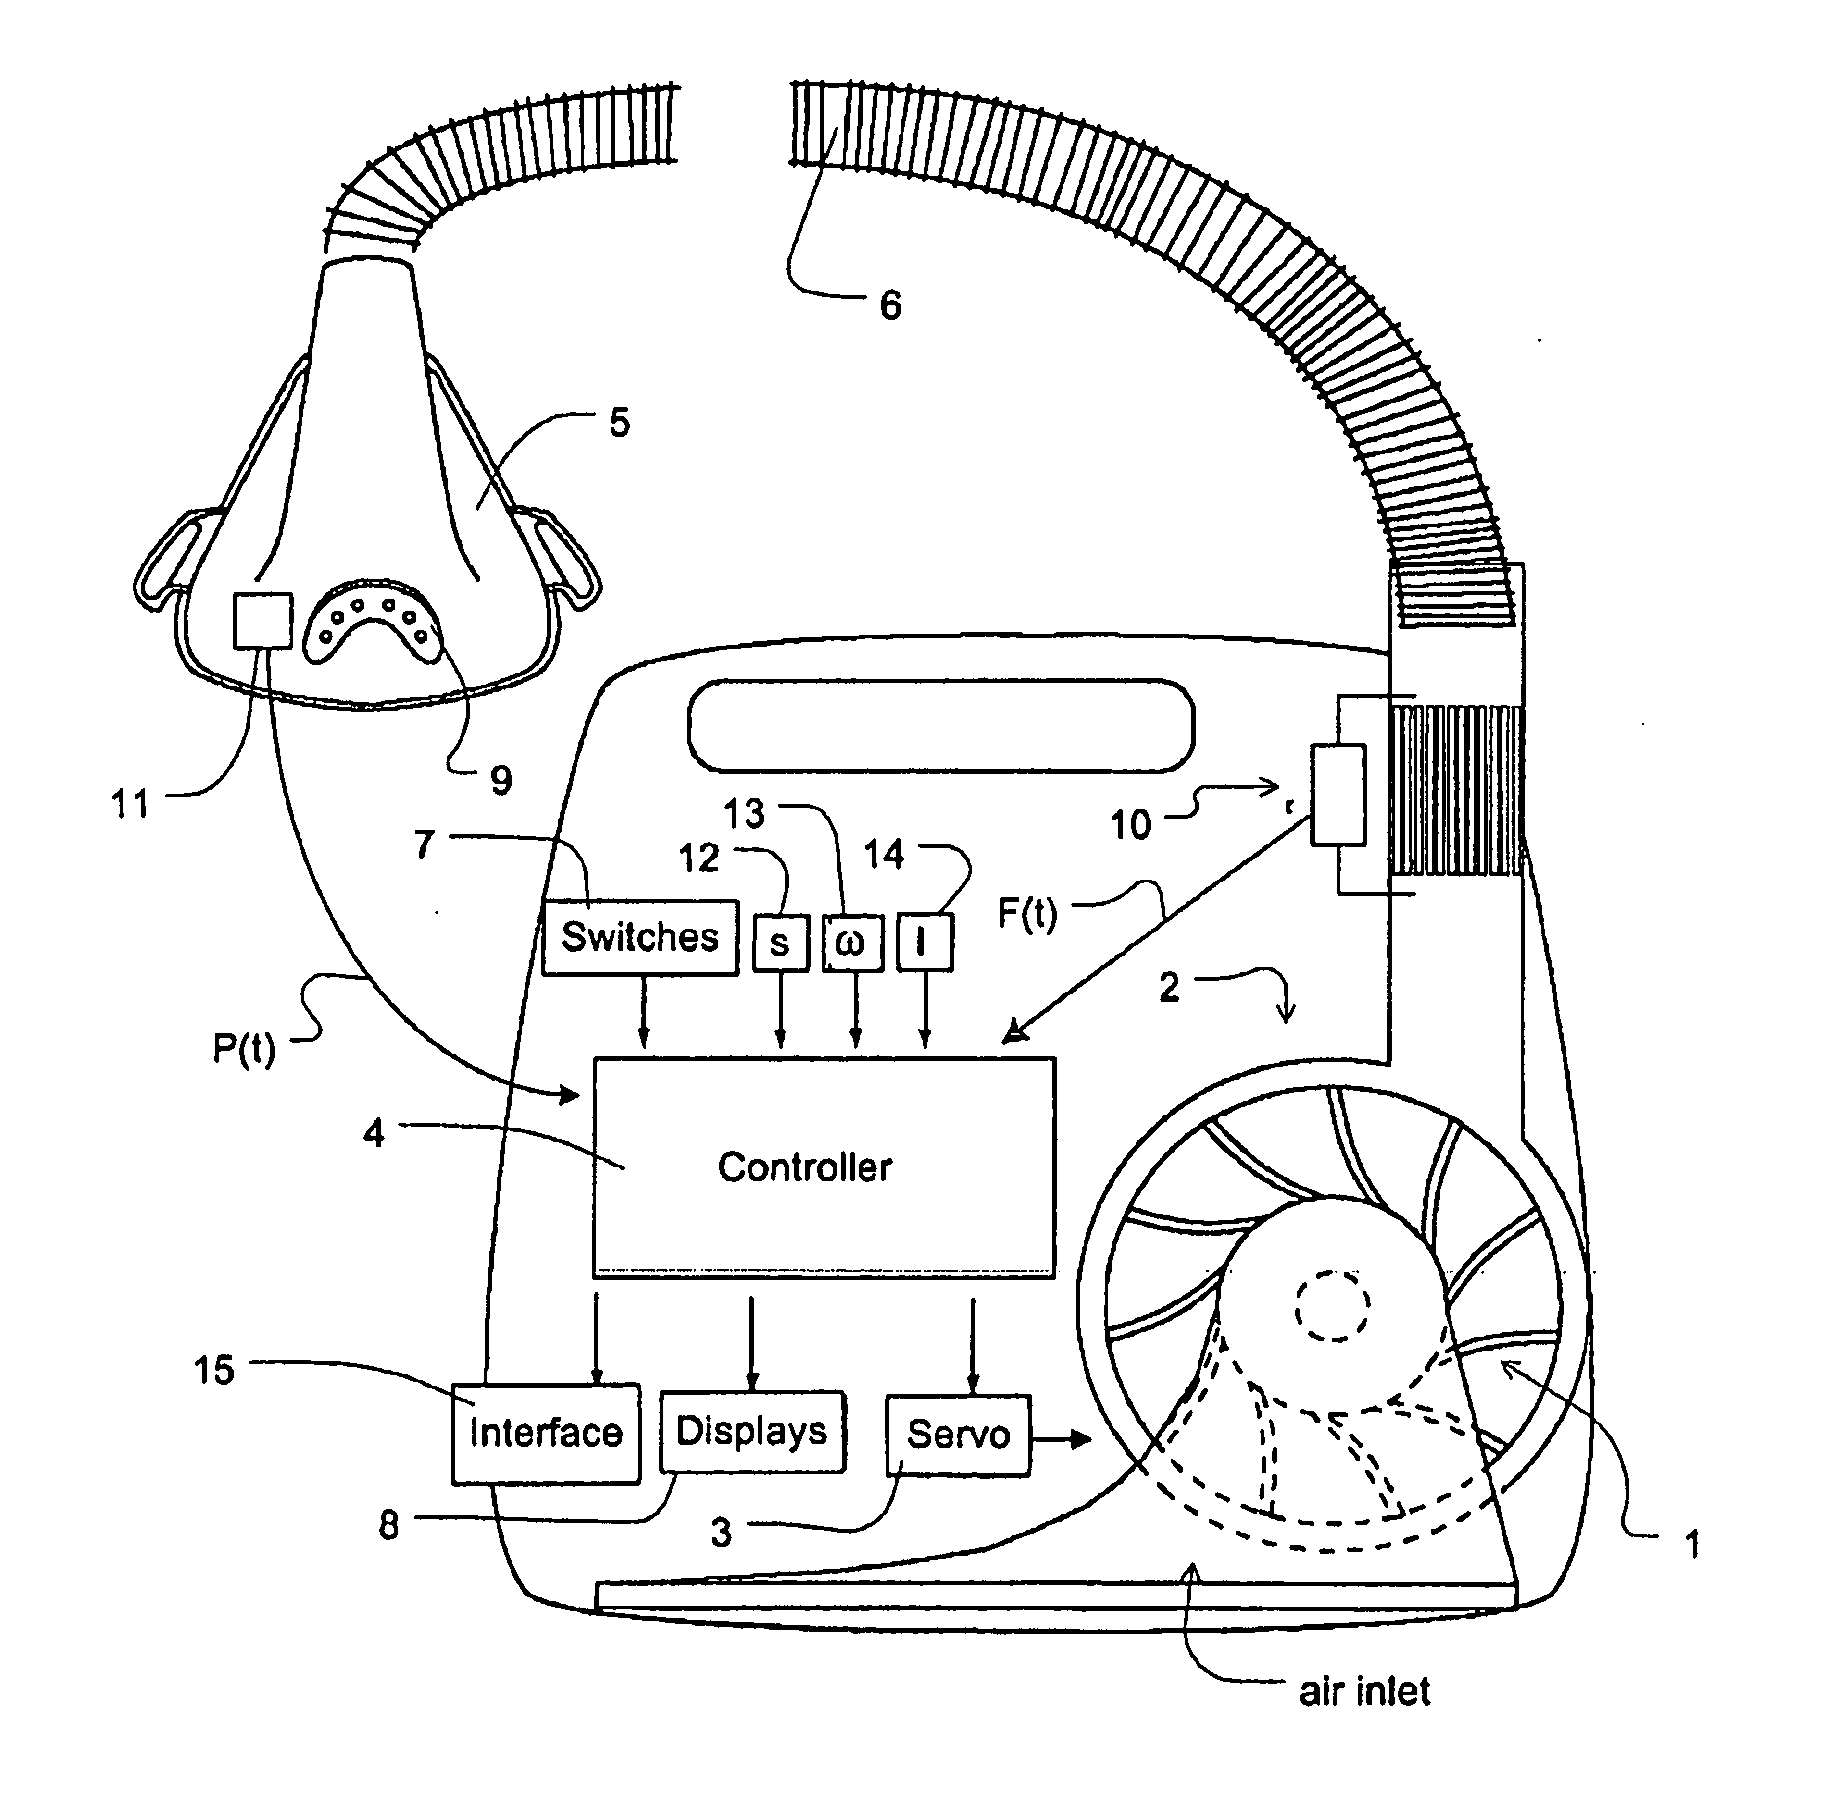 Methods, systems and apparatus for paced breathing